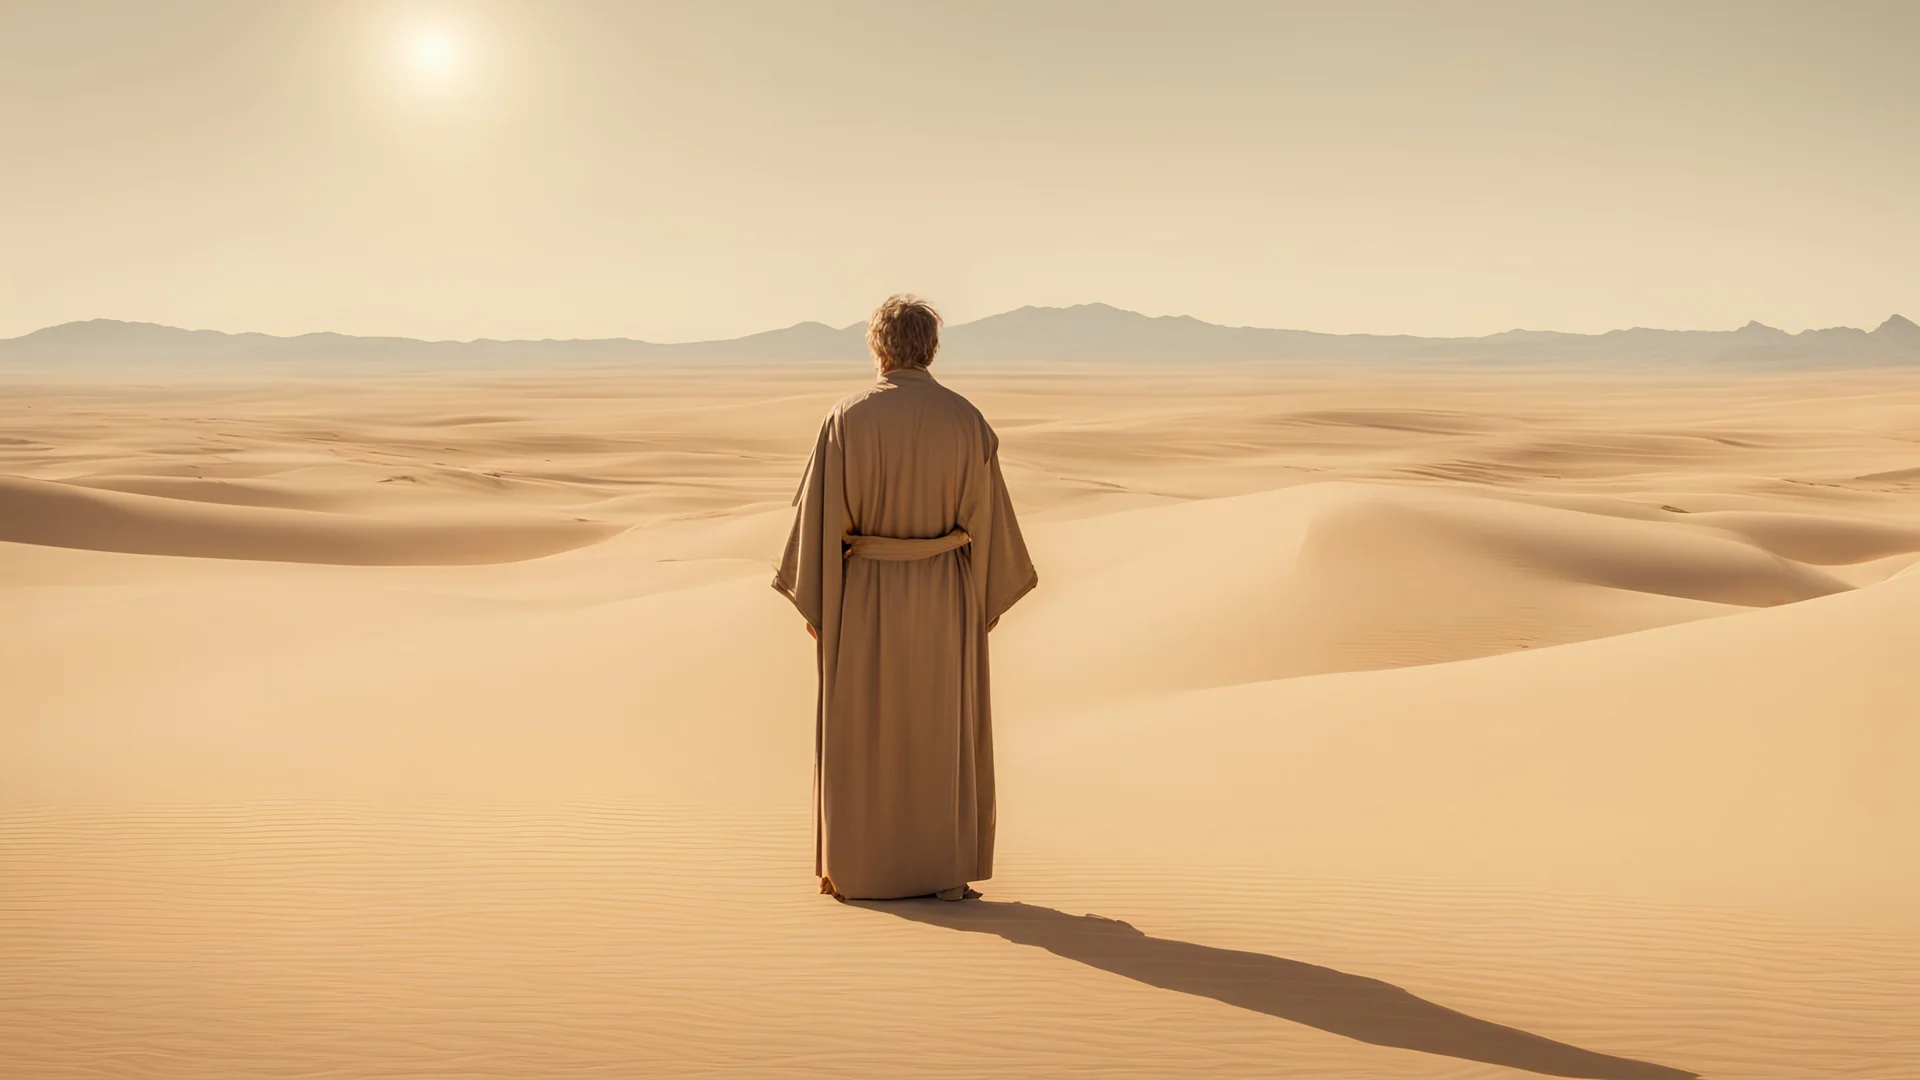 A man appears with his back facing the desert, wearing an old robe, looking at the sky